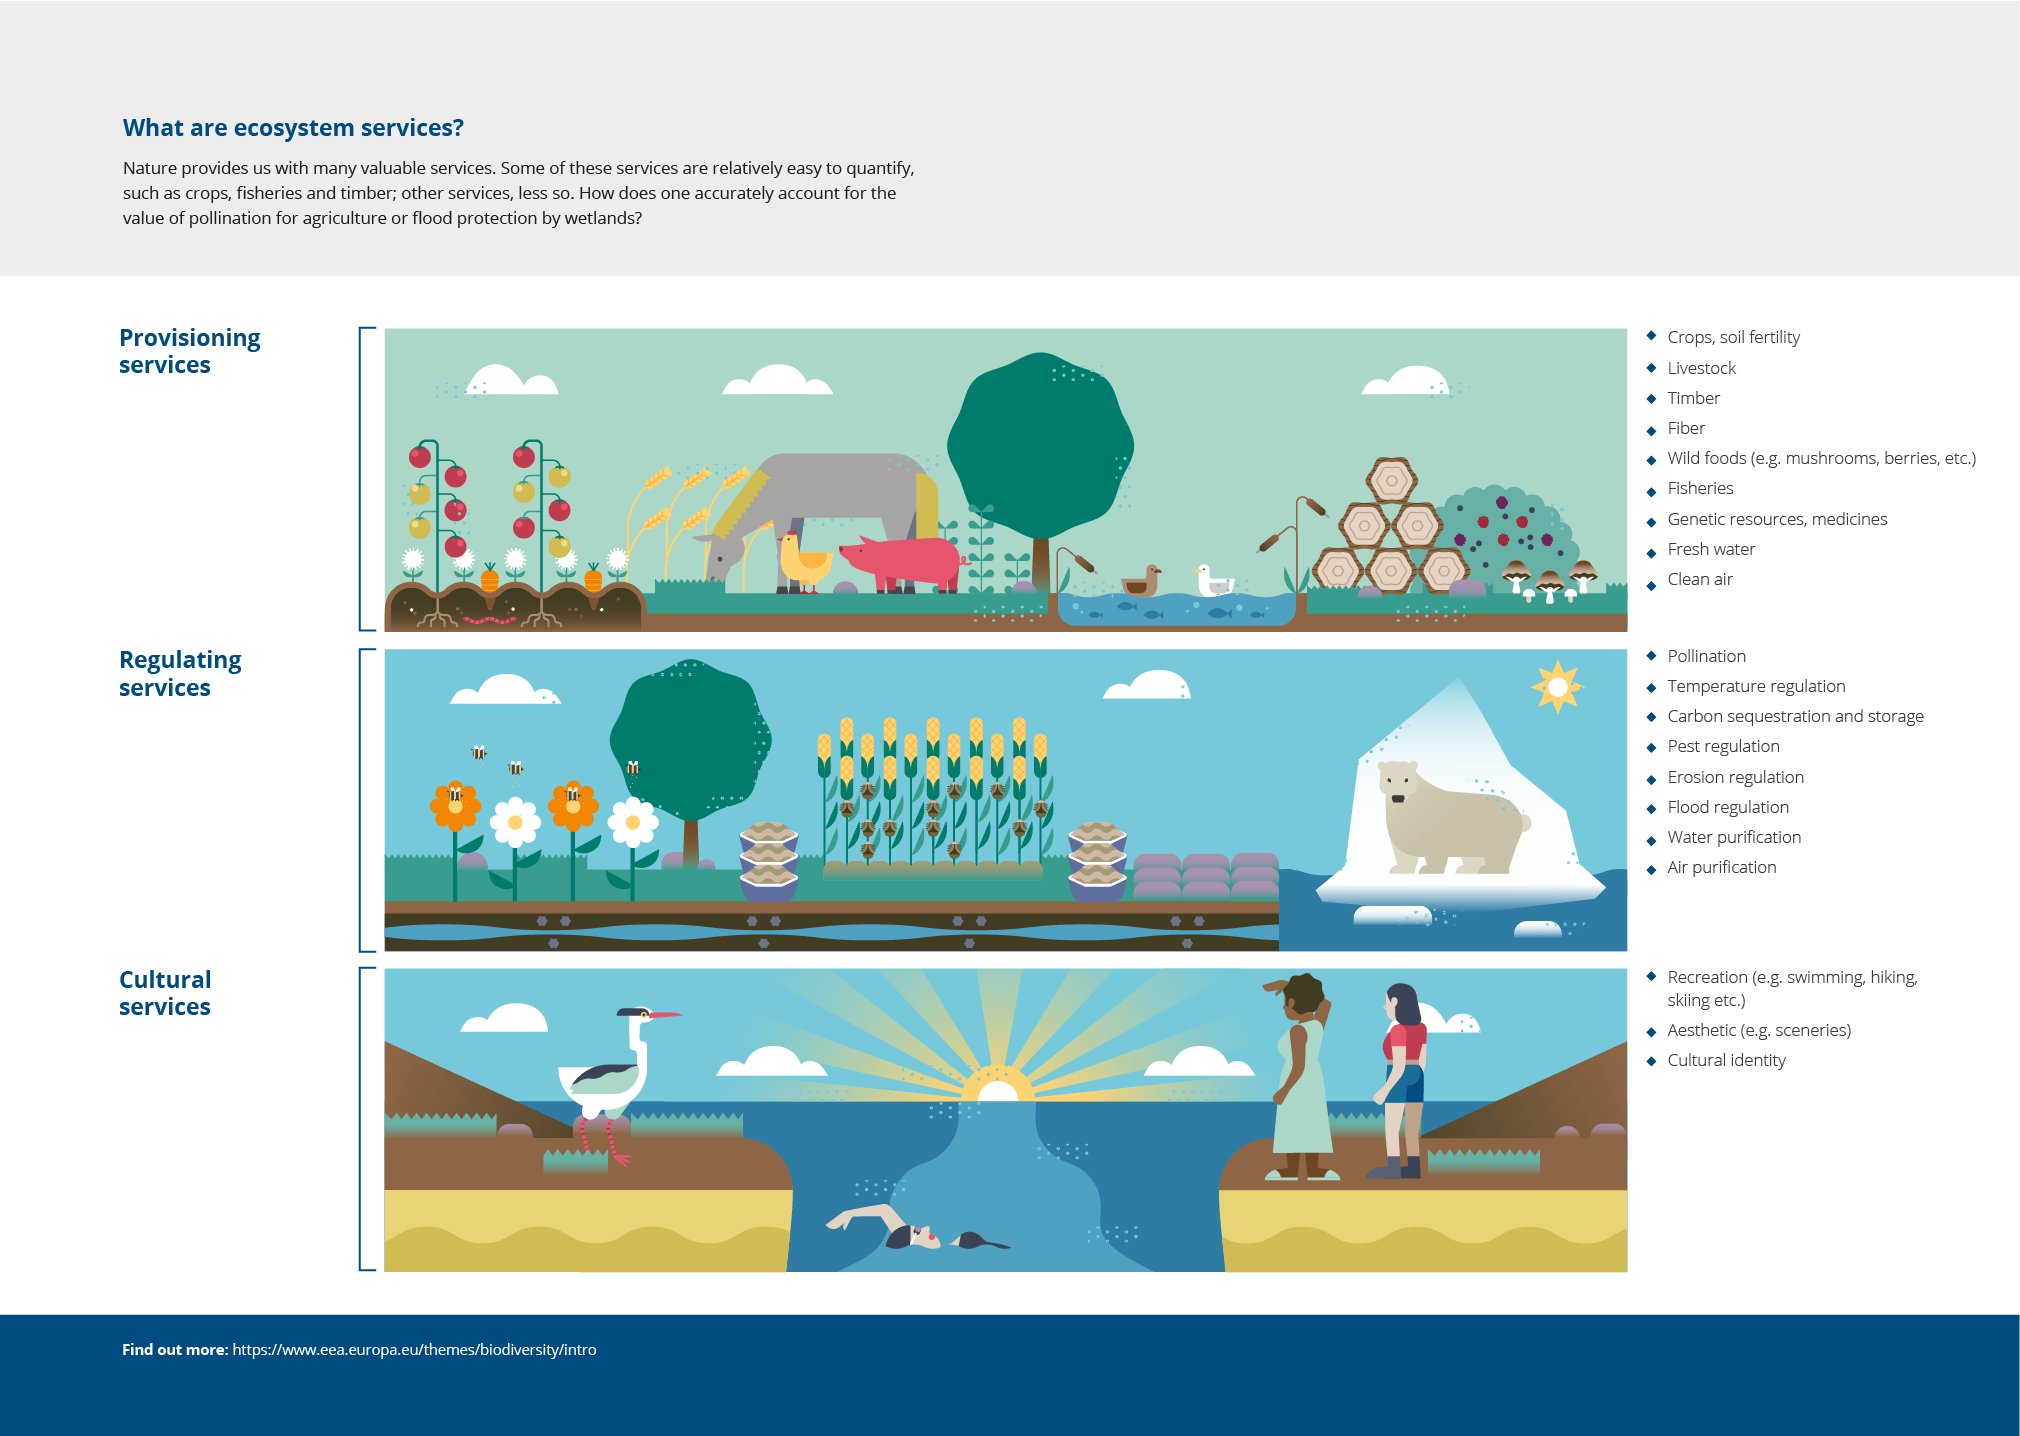 What are ecosystem services?